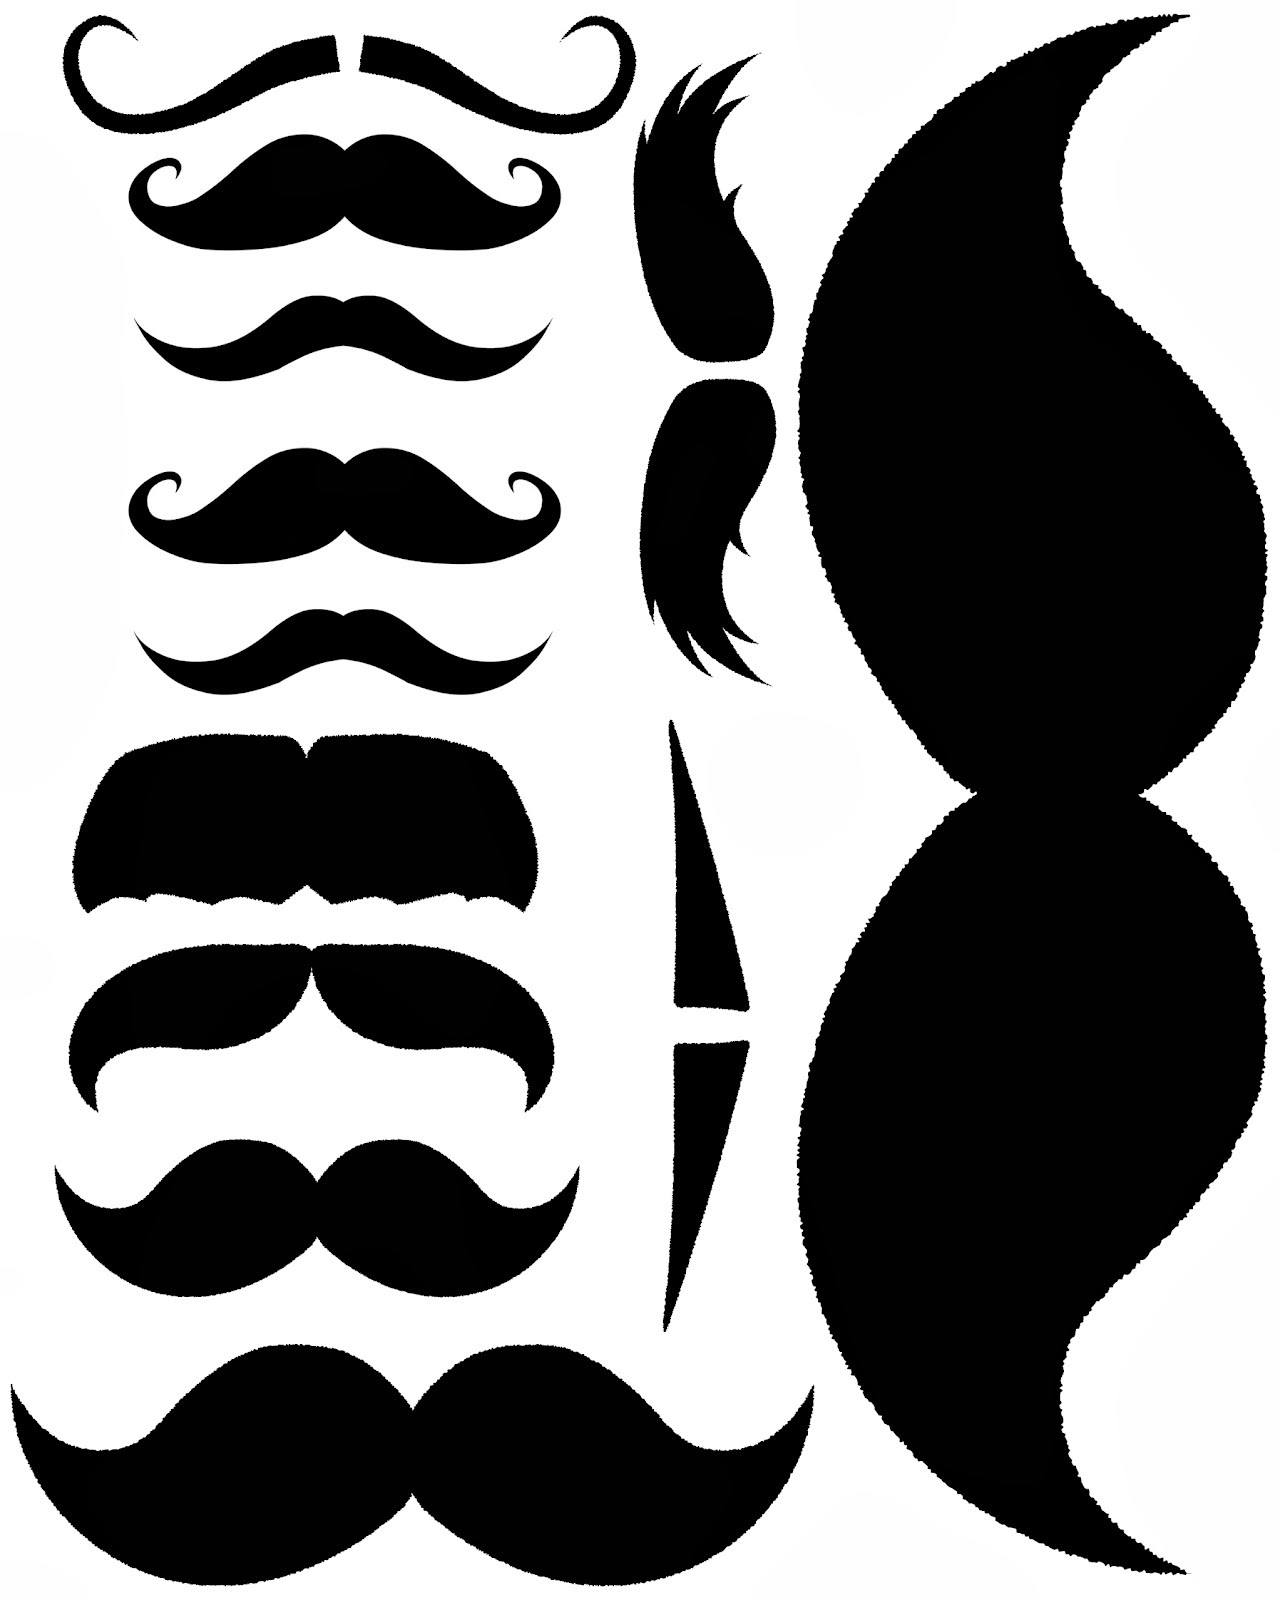 Beard Clip Art - Adding Style and Personality to Your Designs